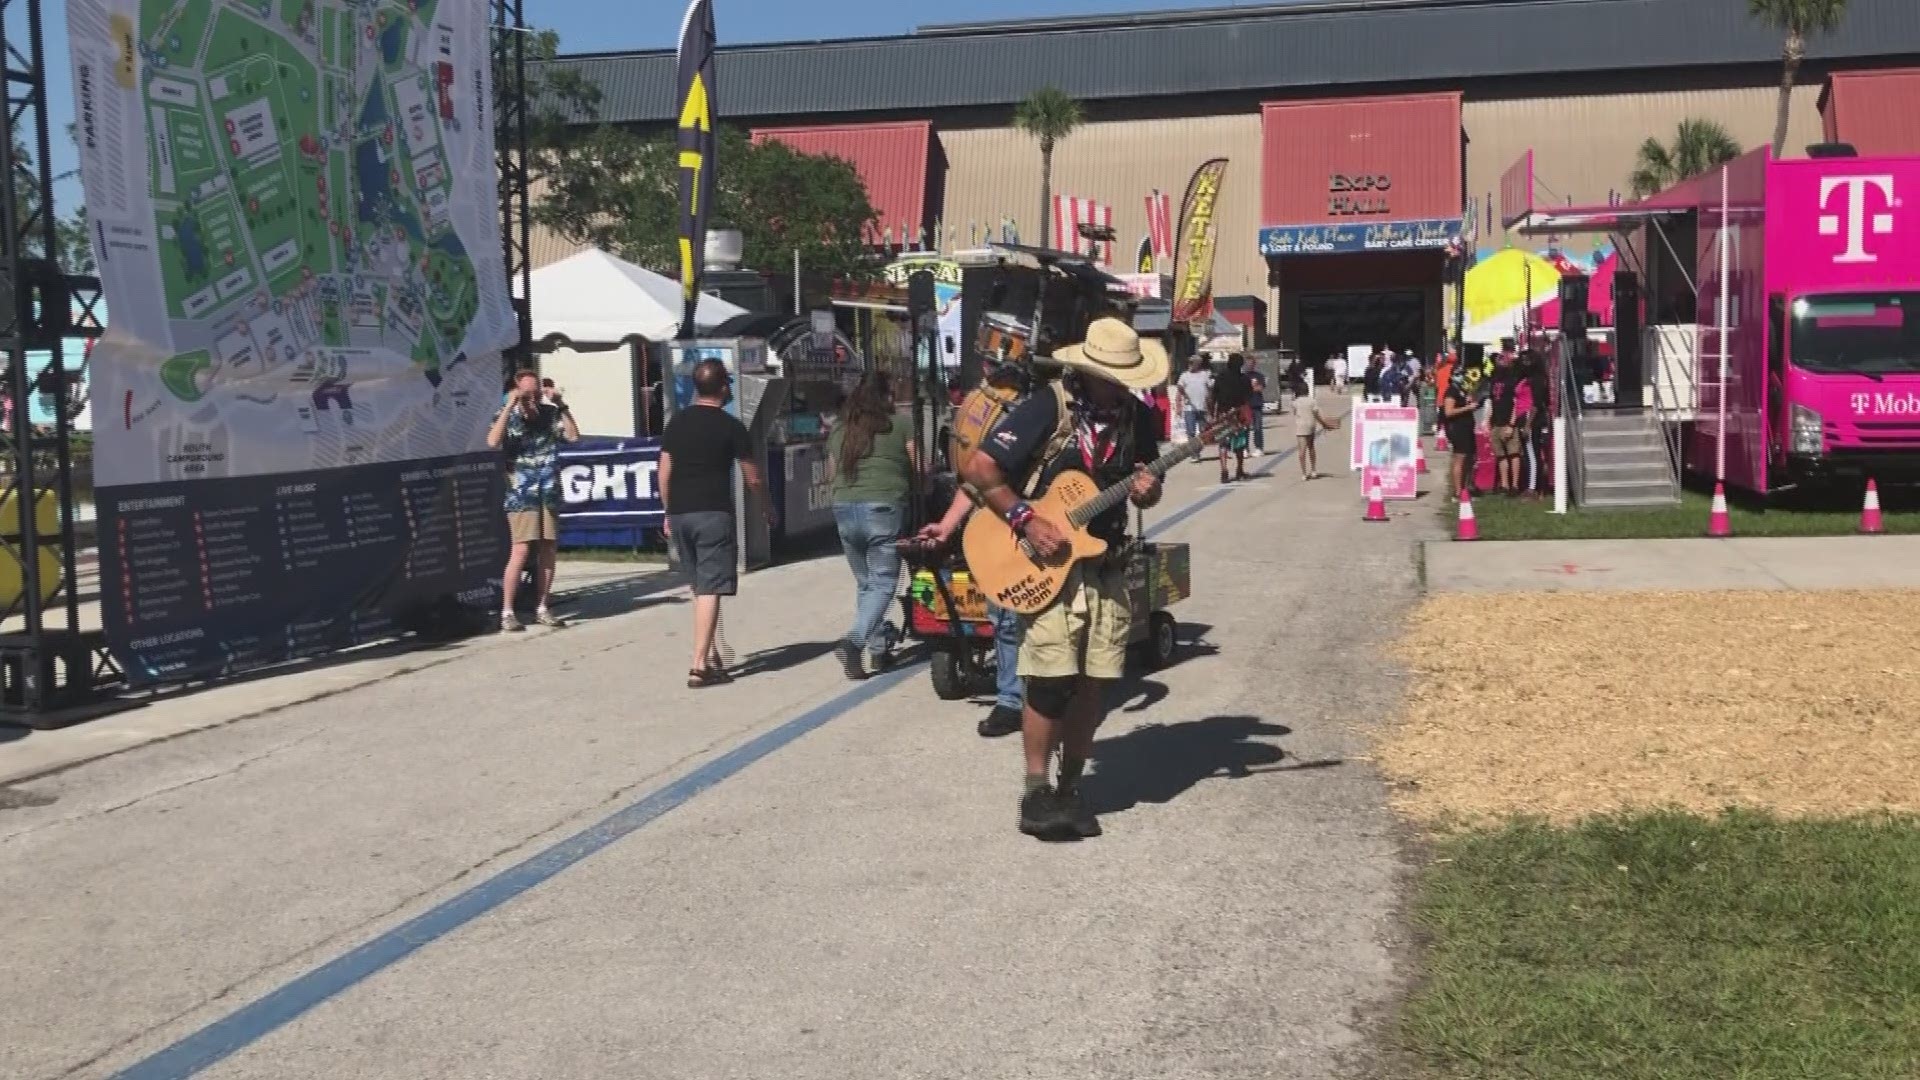 His One Man Band has been performing at the fair since 2014.